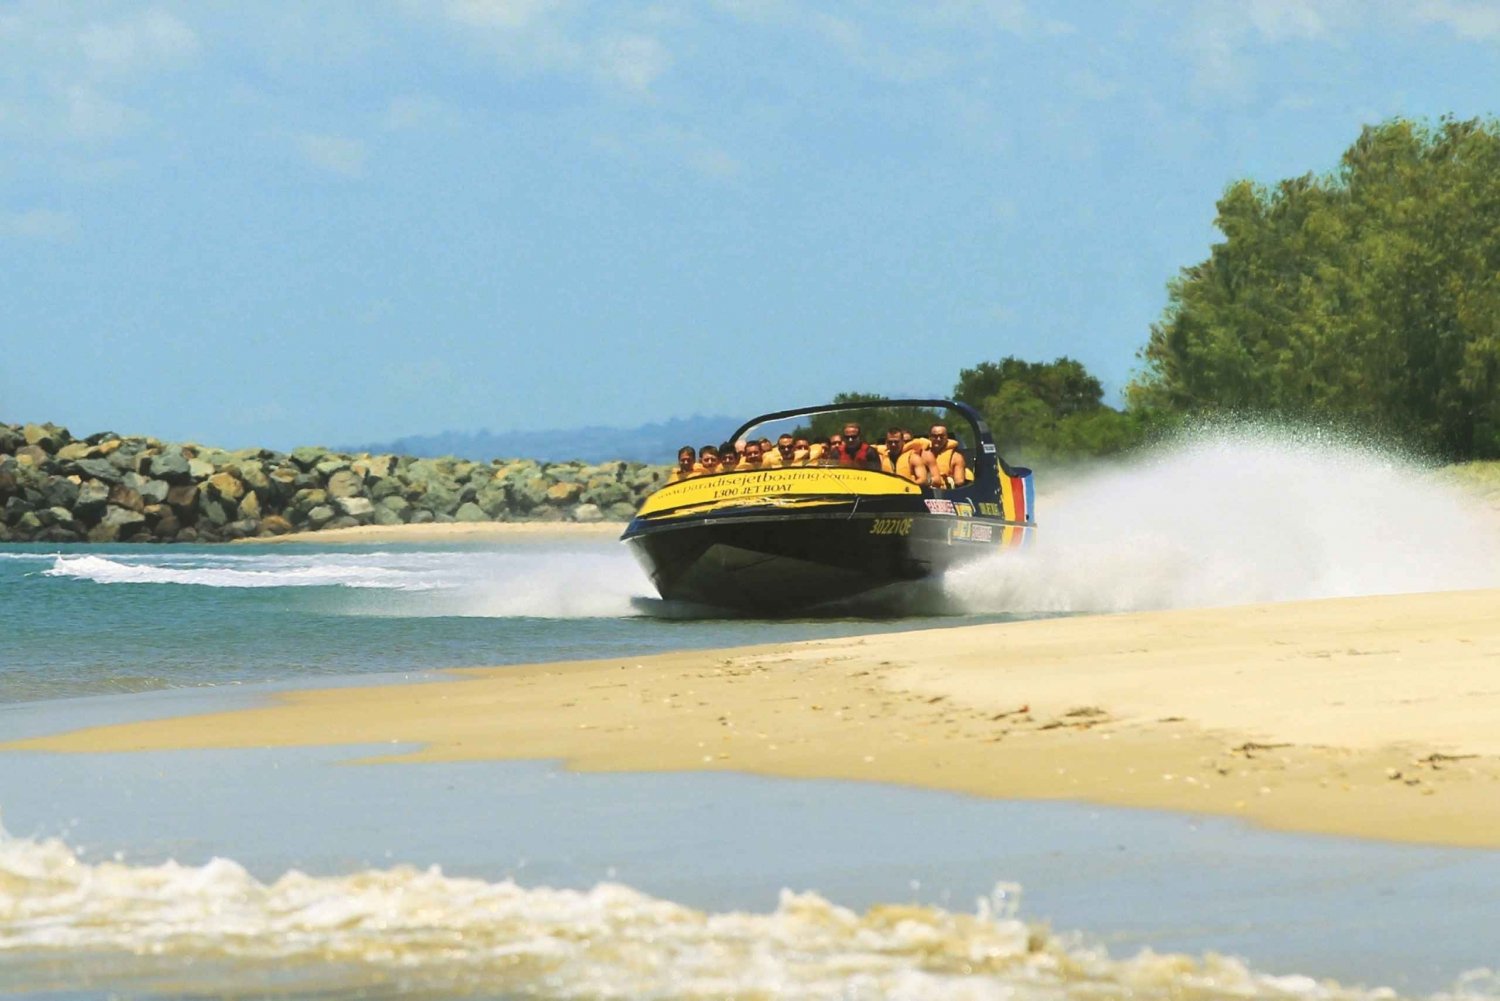 Paradise Jet Boating 55-Minute Broadwater Adventure